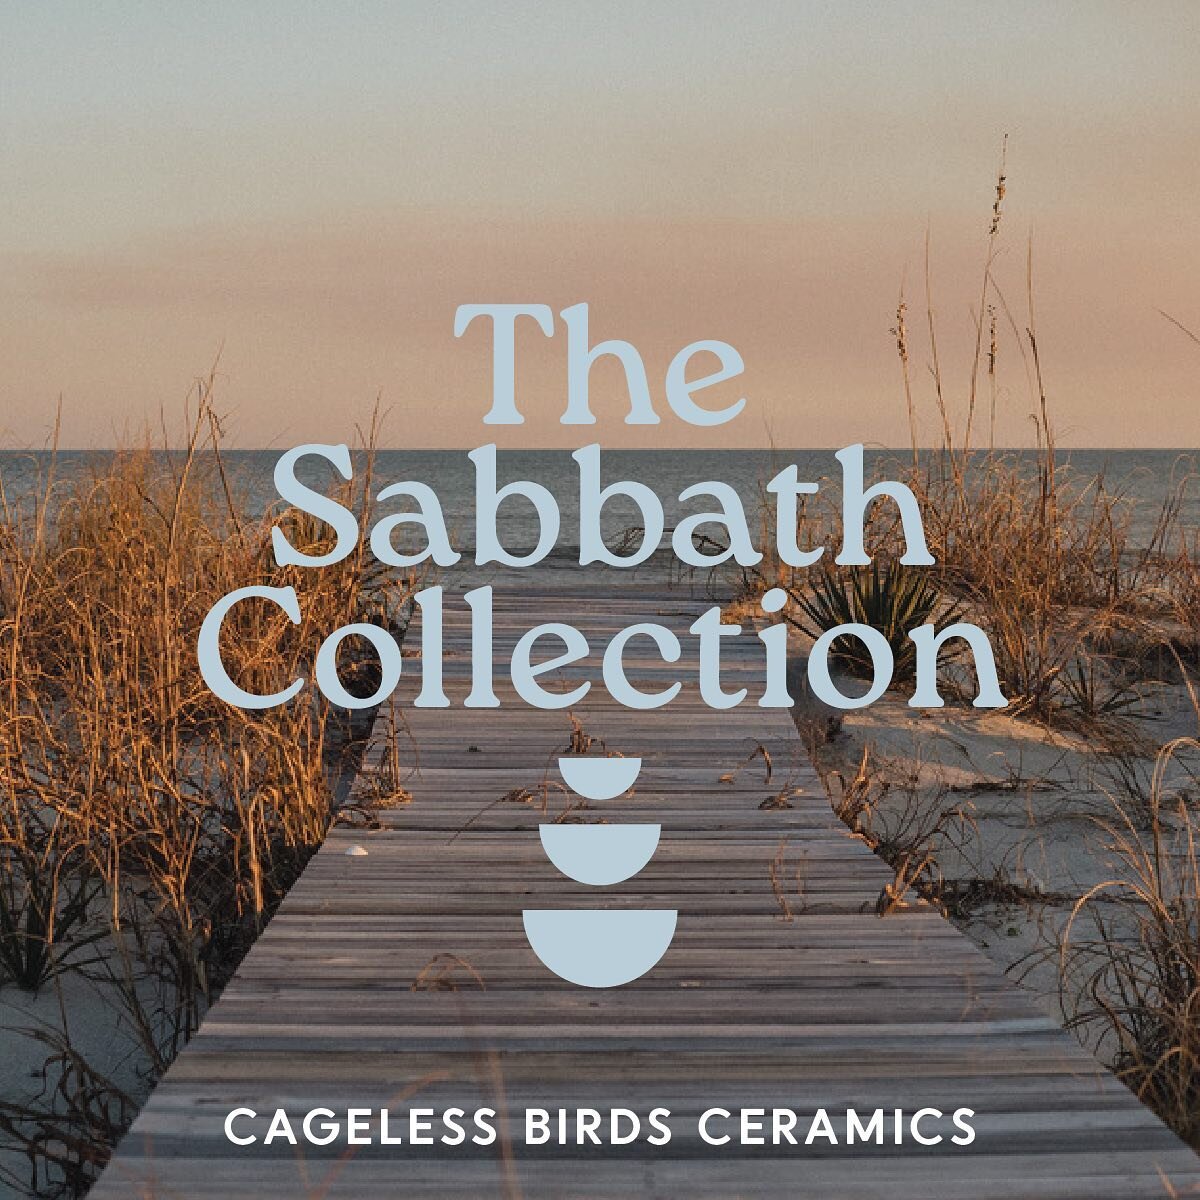 Swipe to see more of our new Cageless Birds Ceramics release: The Sabbath Collection! 🌾

We bless you to boldly step into the &ldquo;Sabbath-rest for the people of God&rdquo; (Hebrews 4:9, NIV) and hope that the Sabbath becomes your favorite day of 